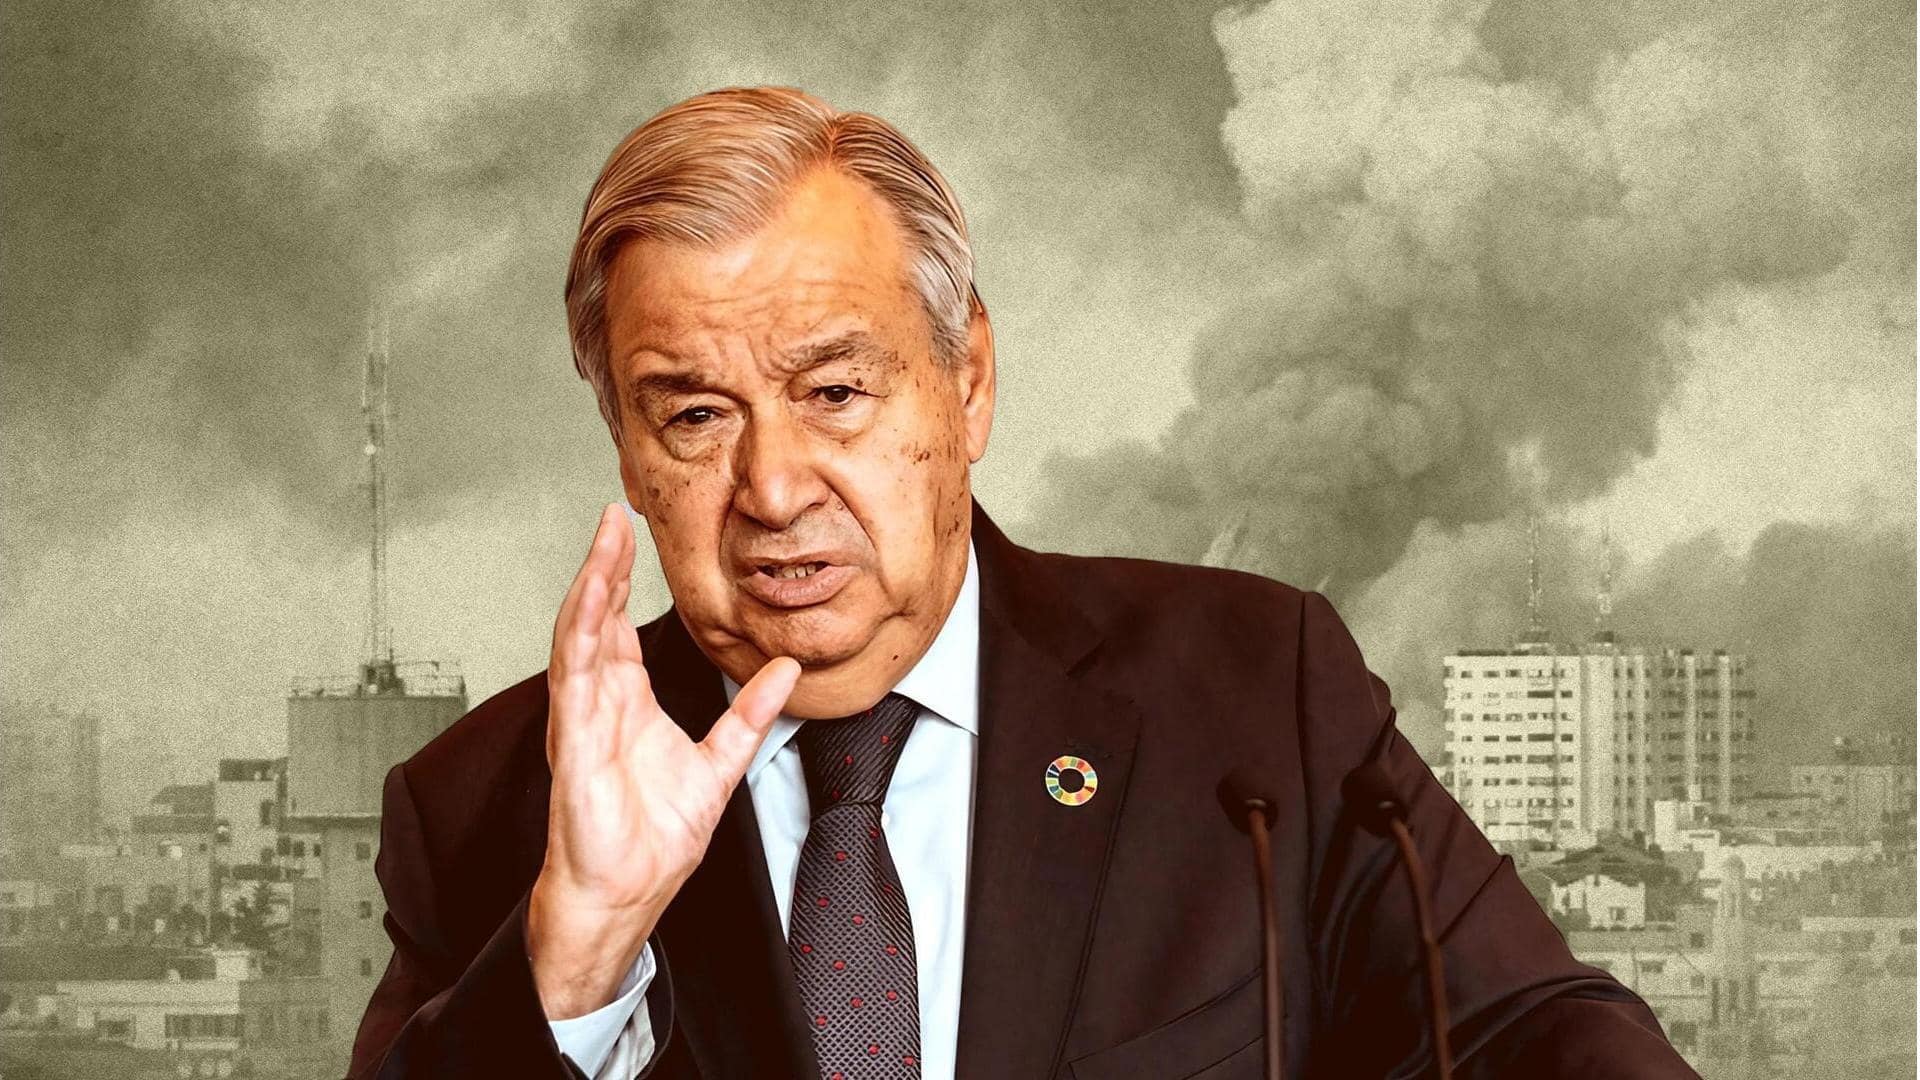 Won't give up: Guterres appeals for Gaza ceasefire in Doha